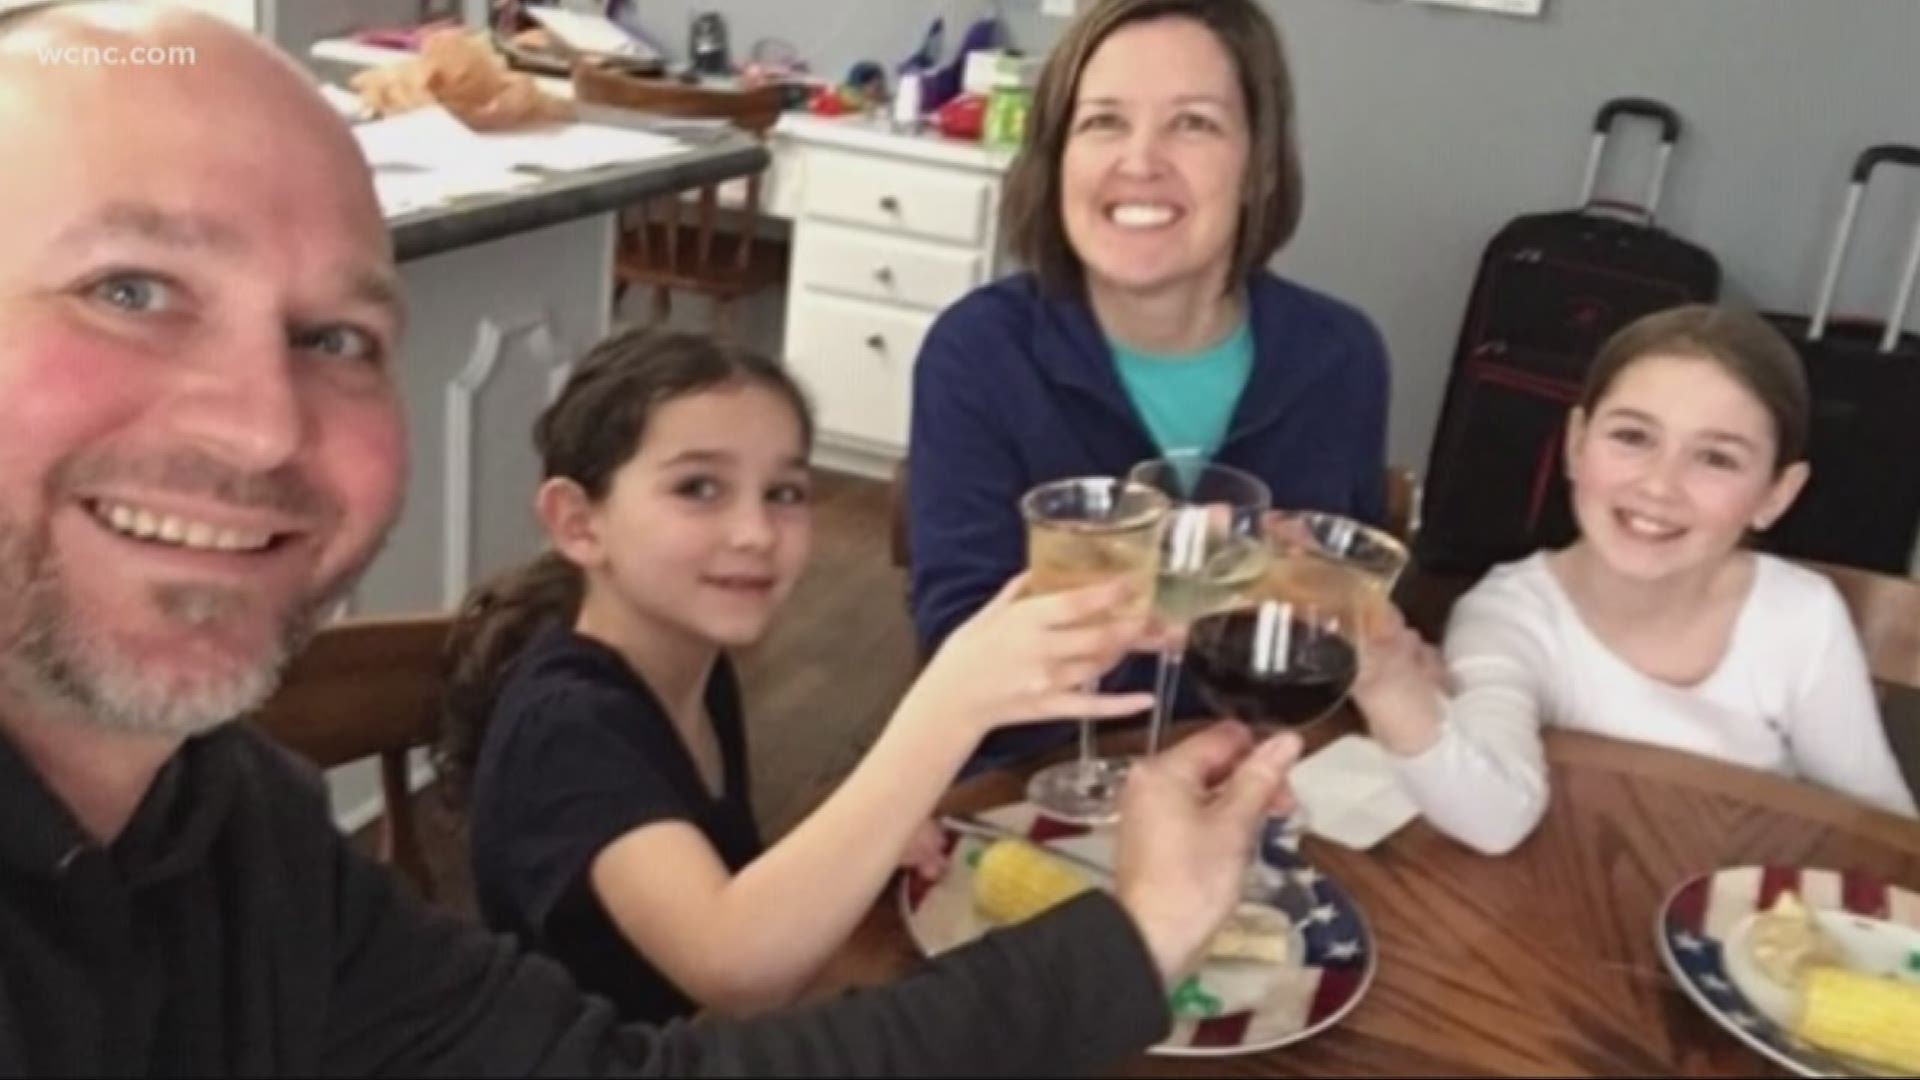 After spending days cooped up in their home, this Charlotte family decided to take virtual trip to Italy without ever leaving their home.